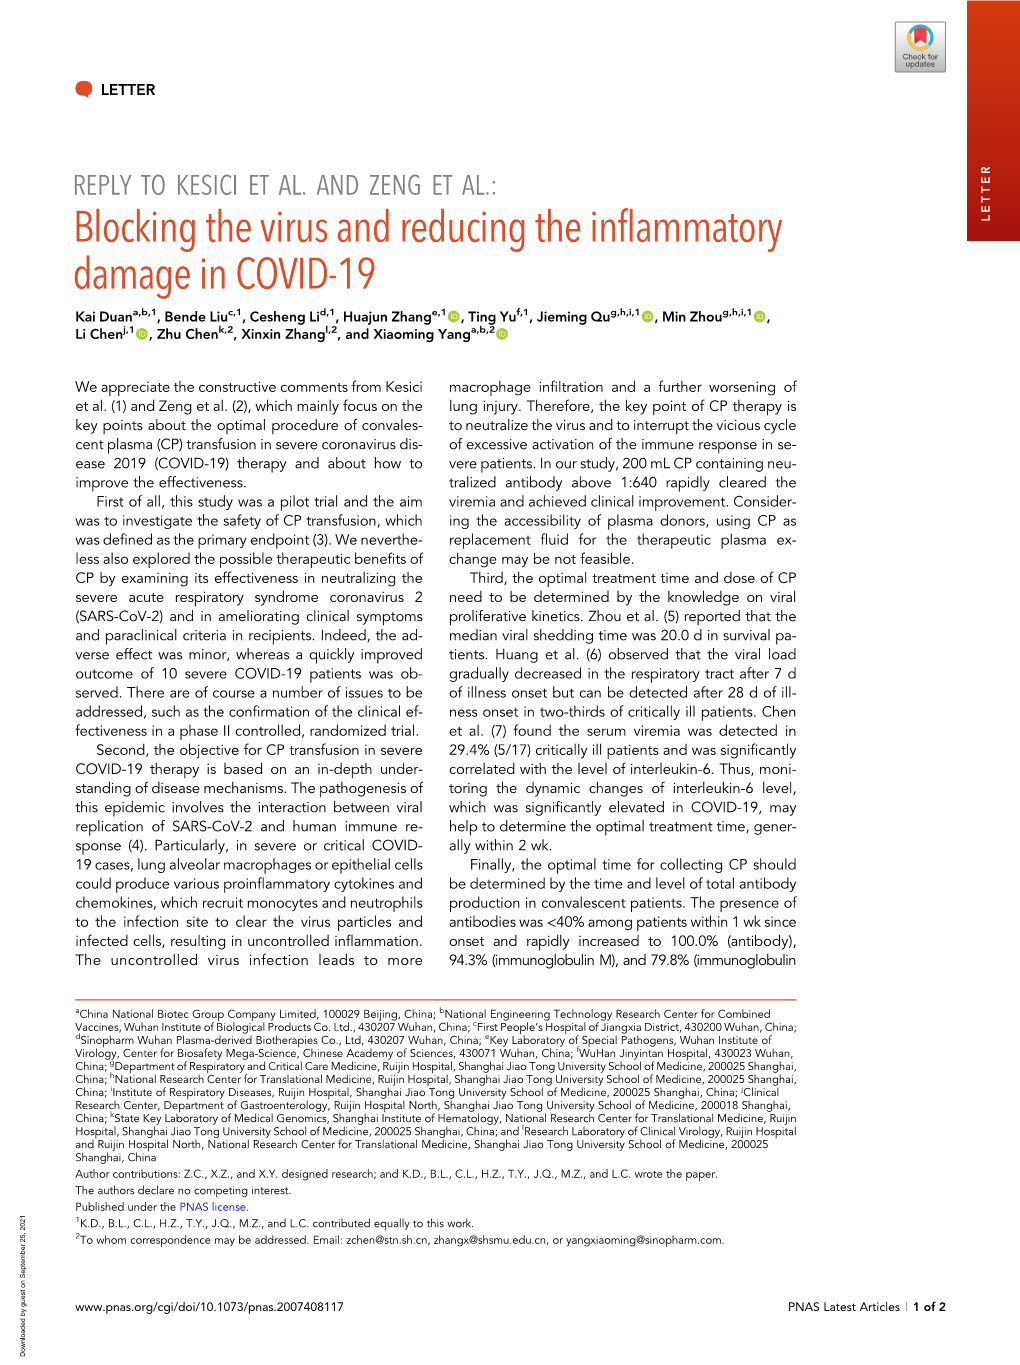 Reply to Kesici Et Al. and Zeng Et Al.: Blocking the Virus and Reducing The